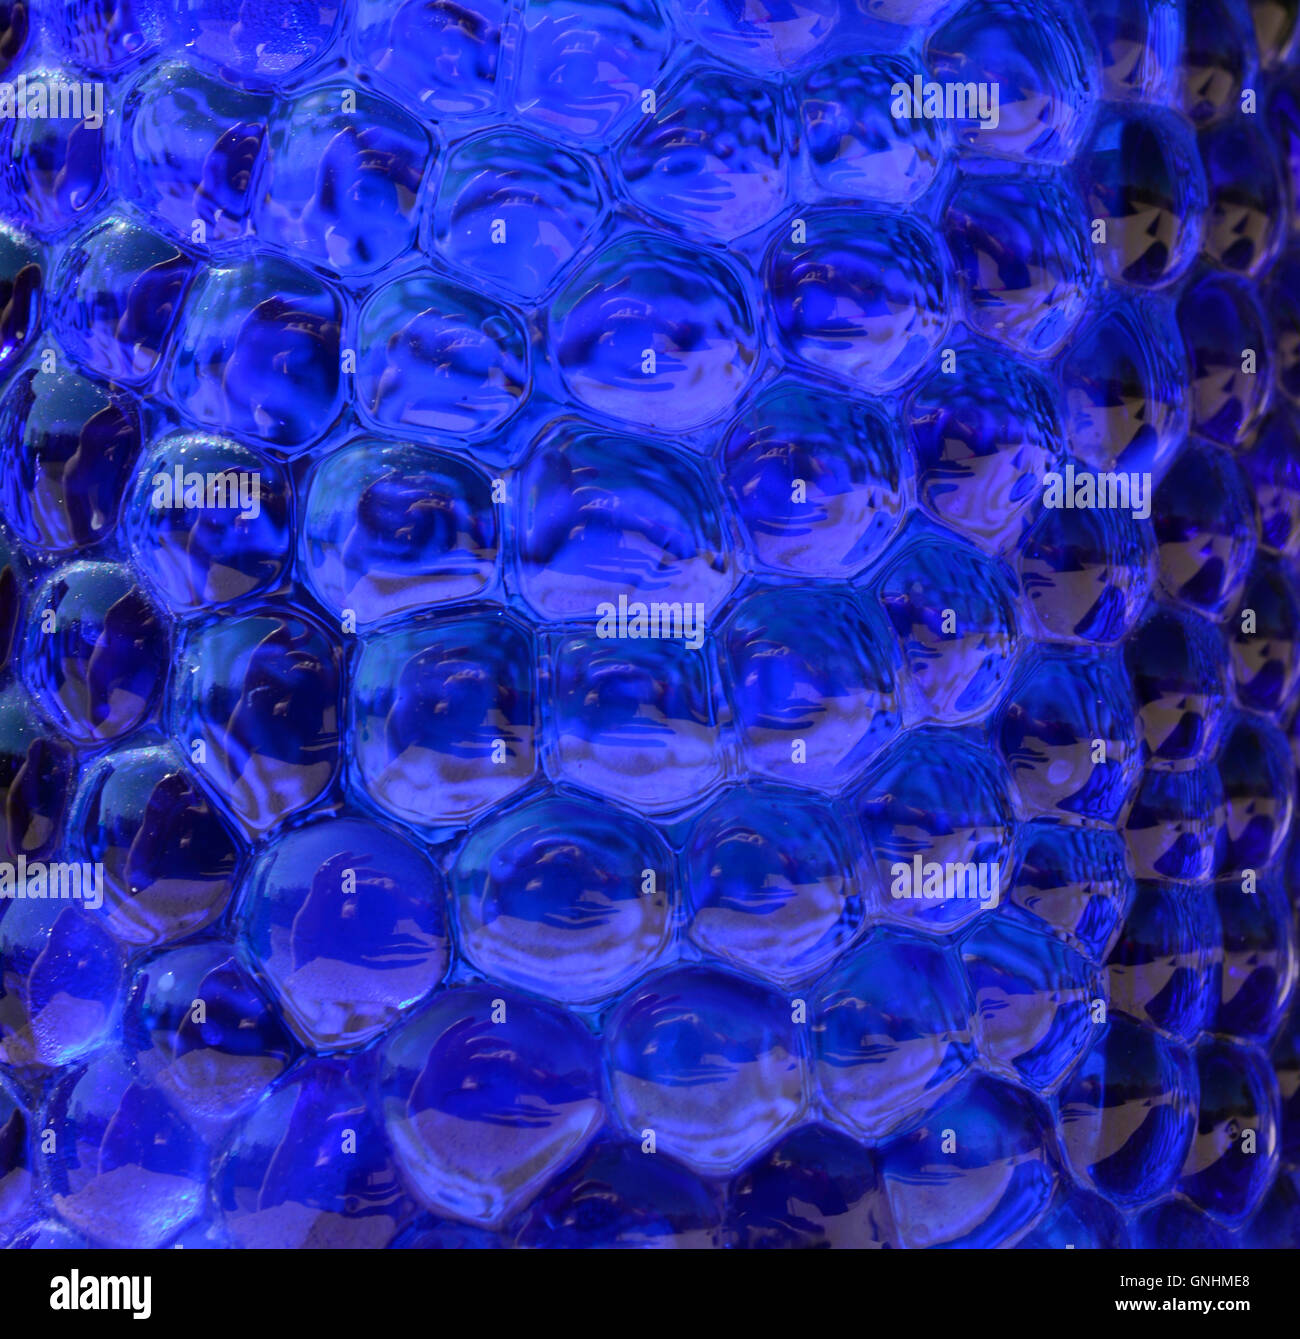 Dotted dark blue glass for backgrounds. Bubbly blue glass like liquid. Stock Photo